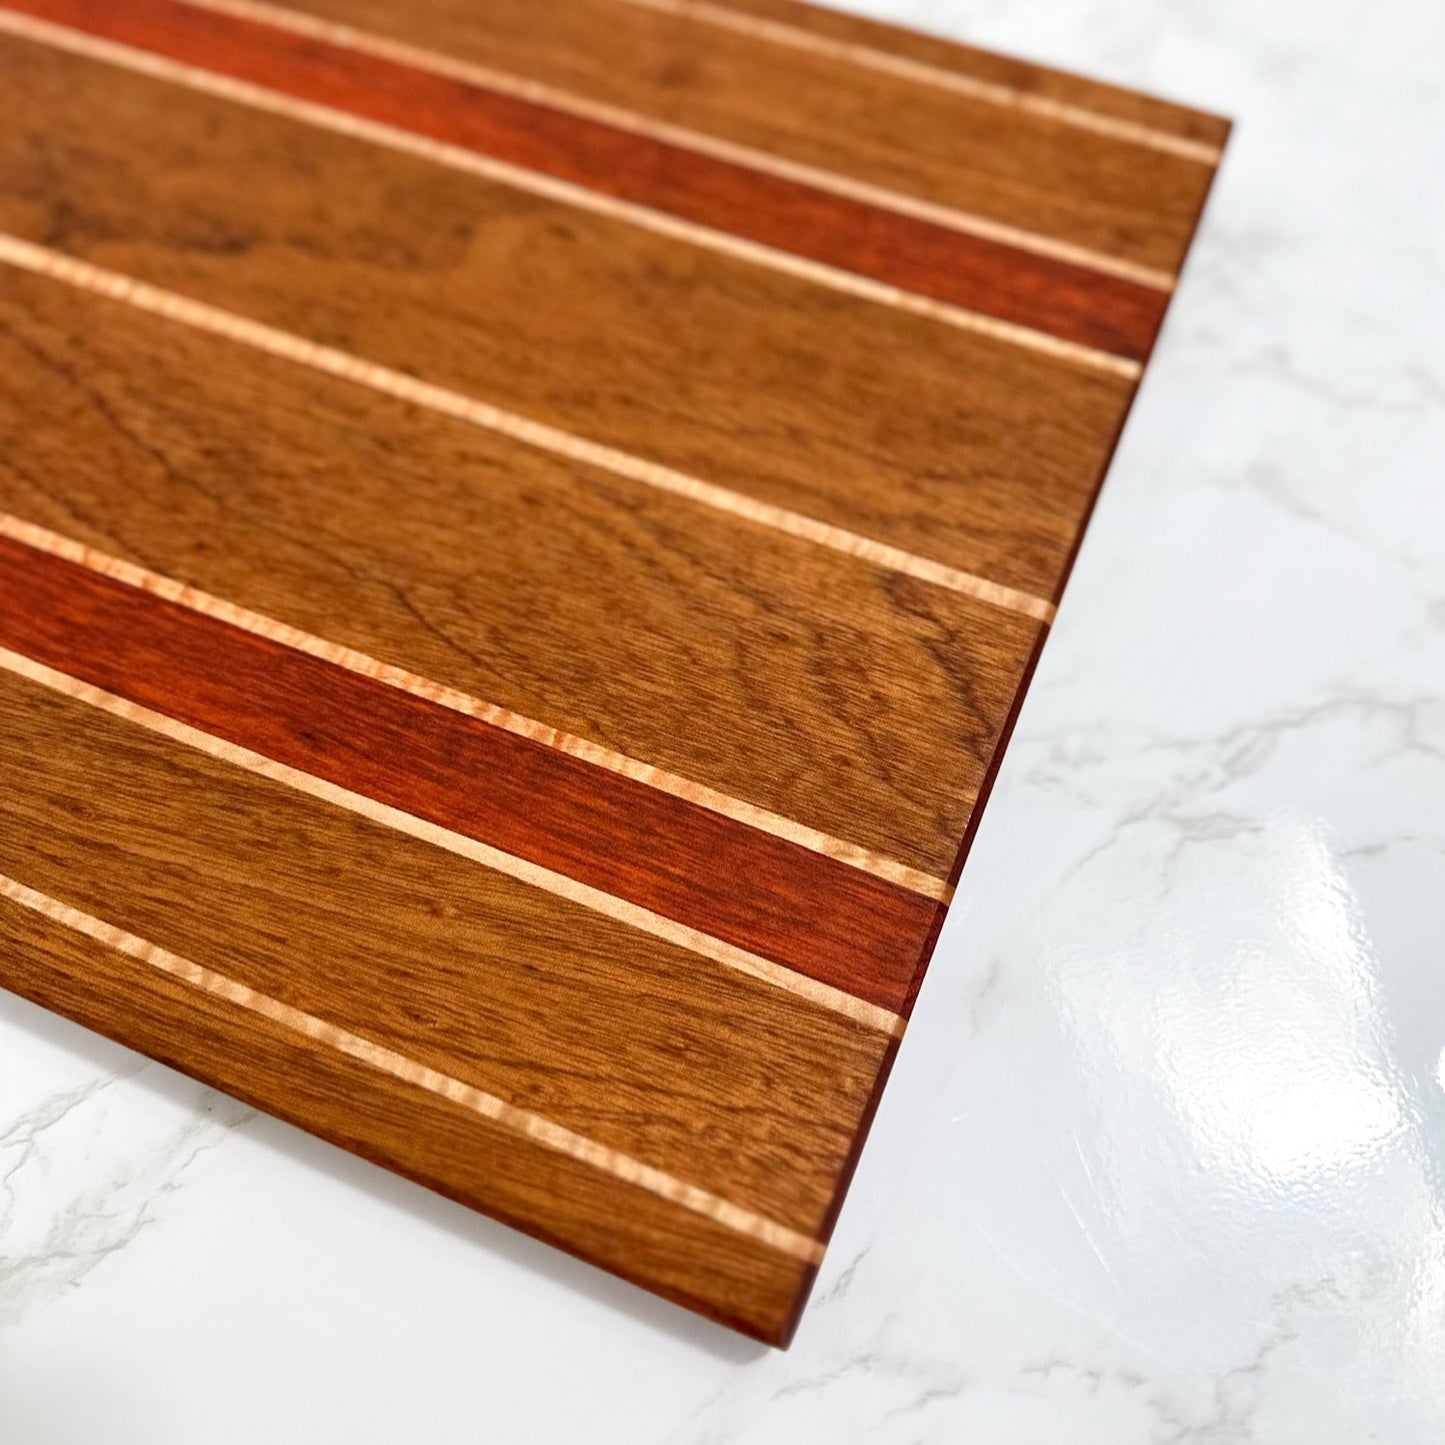 Exotic Sapele & Bloodwood - Handmade Wooden Cutting Board - one-off